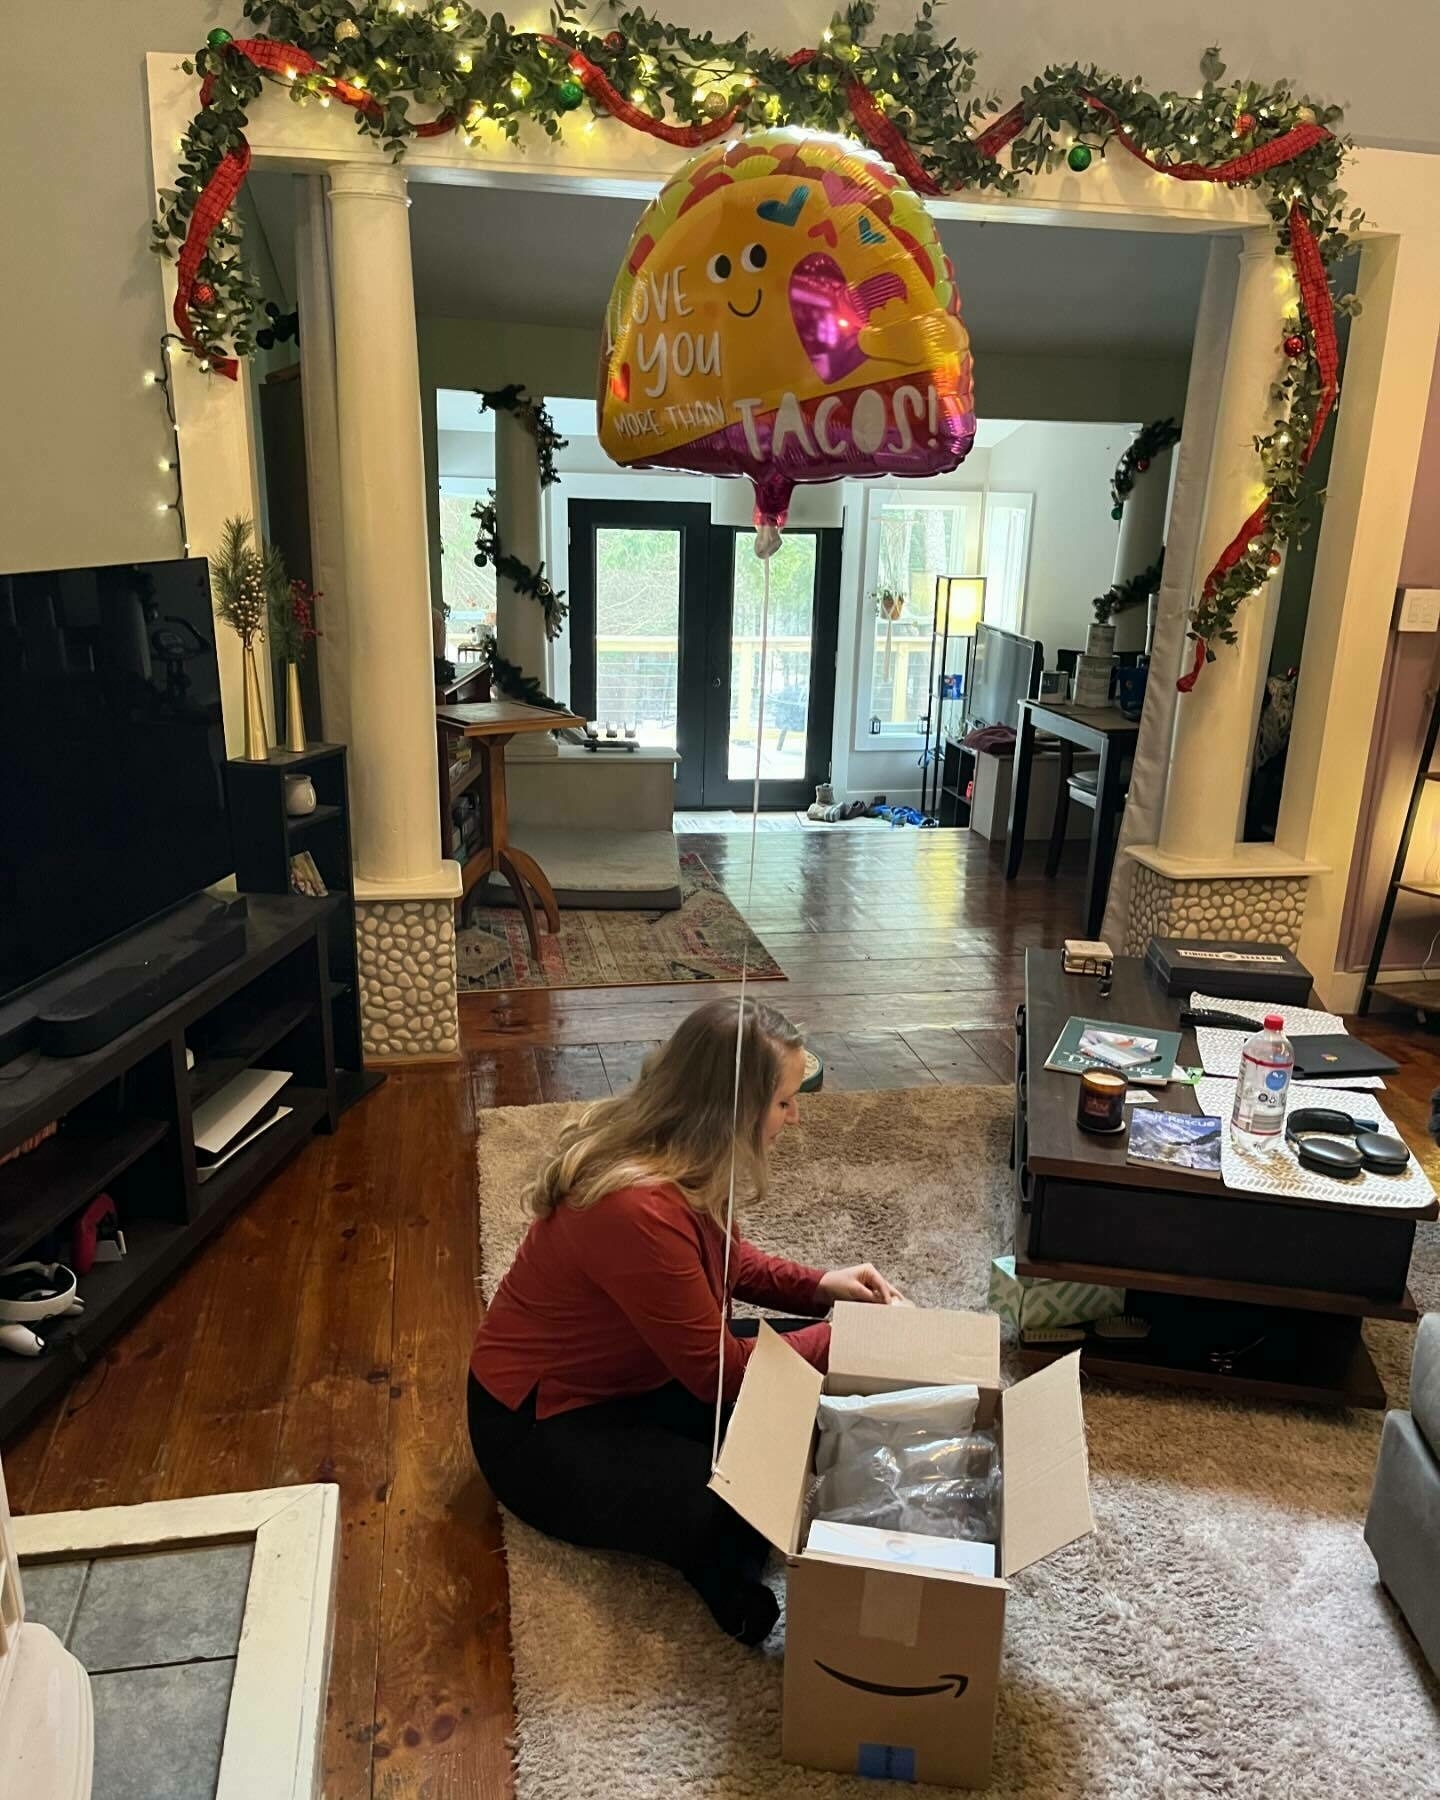 A person sits on the floor unpacking a box in a decorated living room. A balloon overhead reads &ldquo;I Love You More Than Tacos!&quot;